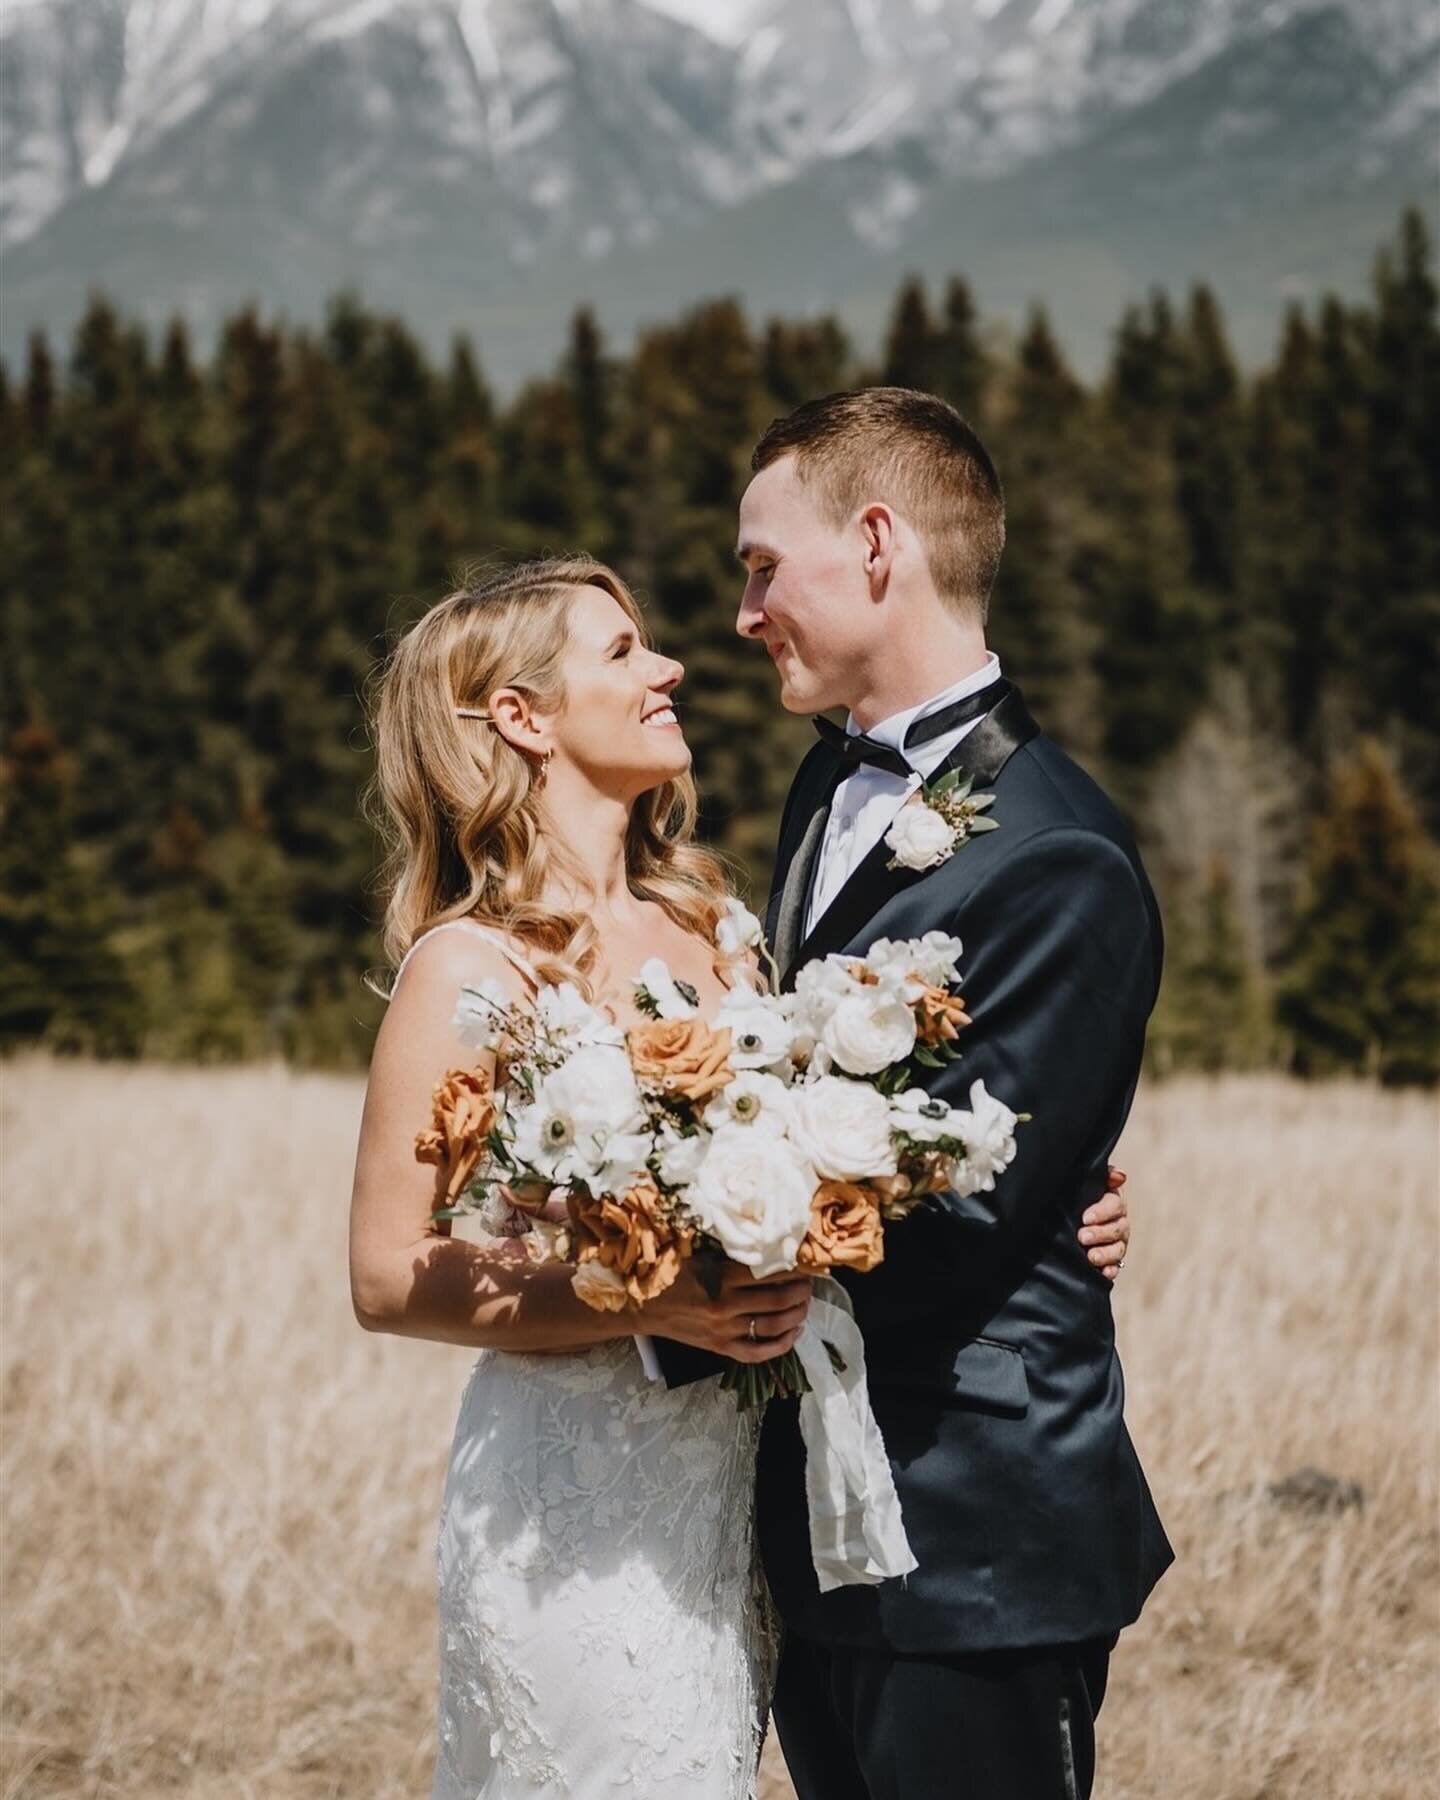 Canmore weddings will always have my heart and April in the mountains isn&rsquo;t so bad, especially last year when most of the snow had melted&hellip;..unlike today 🌨️❄️🗻
⠀⠀⠀⠀⠀⠀⠀⠀⠀
I am sure you spring ski/ snowboarders love the fresh powder but I